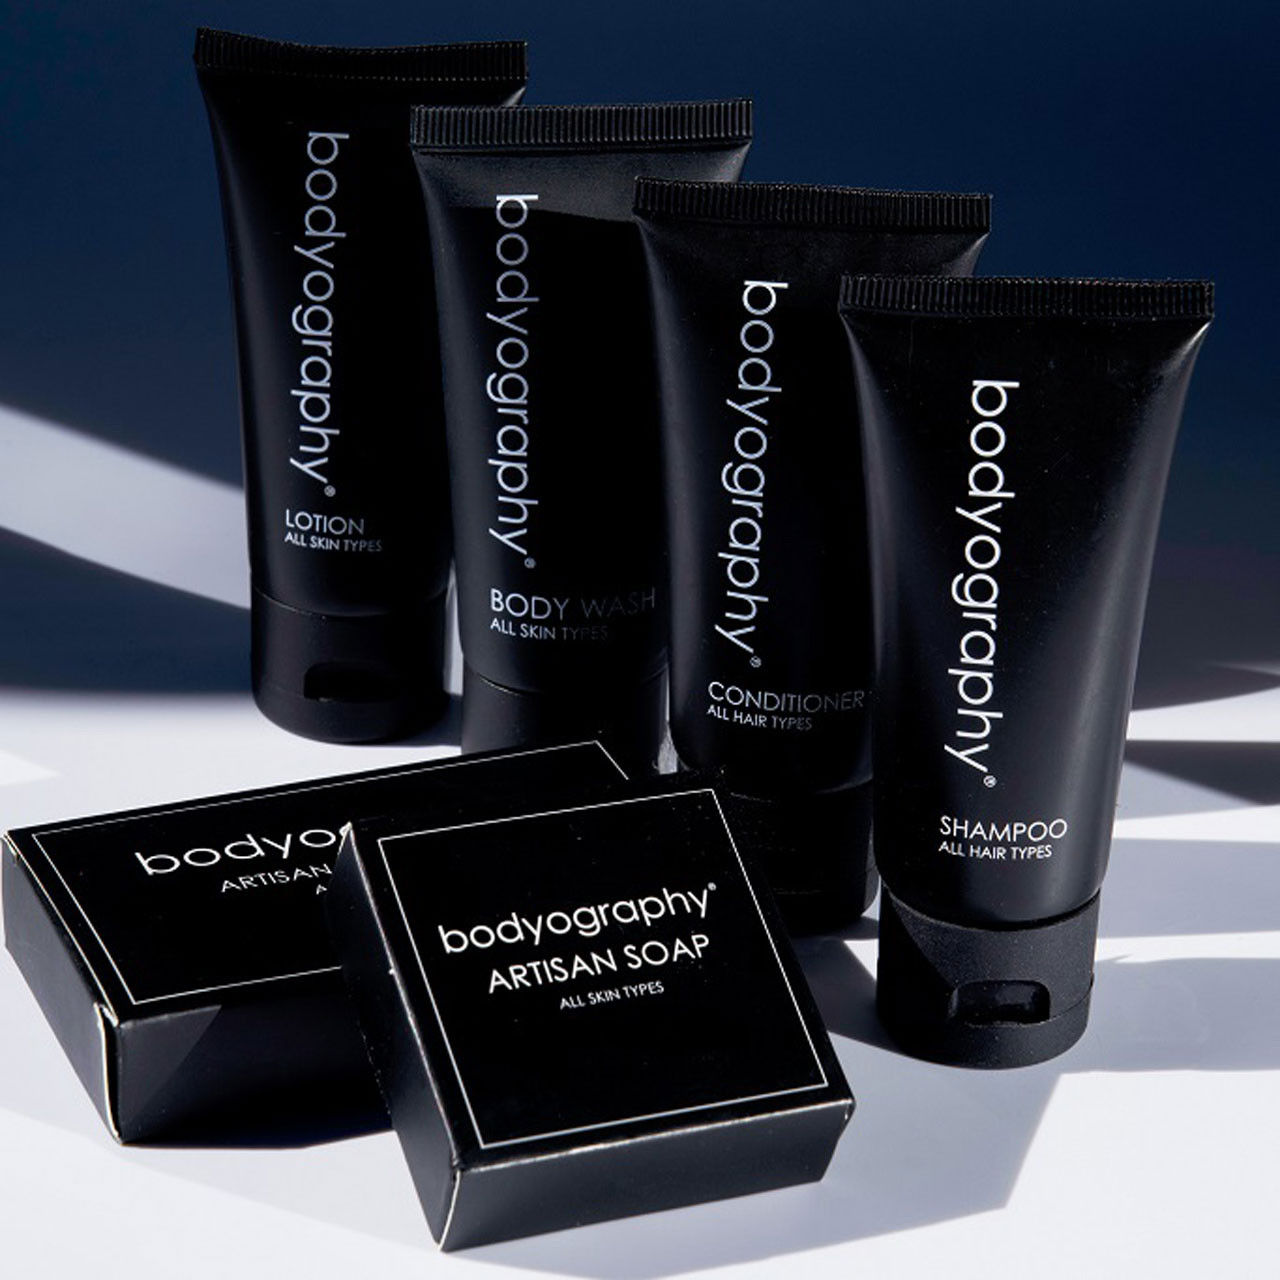 Does the Bodyography shampoo hotel collection include a large H&B lotion?